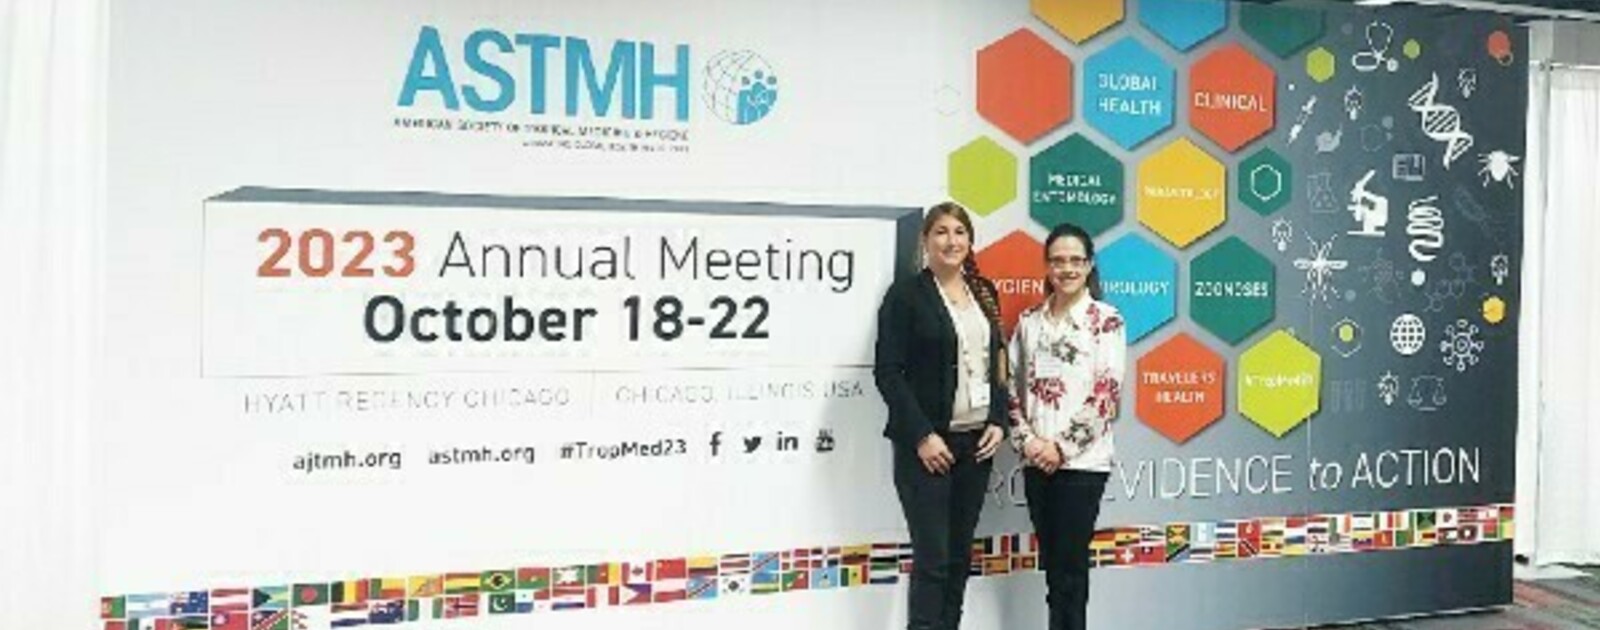 ASTMH Conference Wrap Up News News & Events Remote Emerging